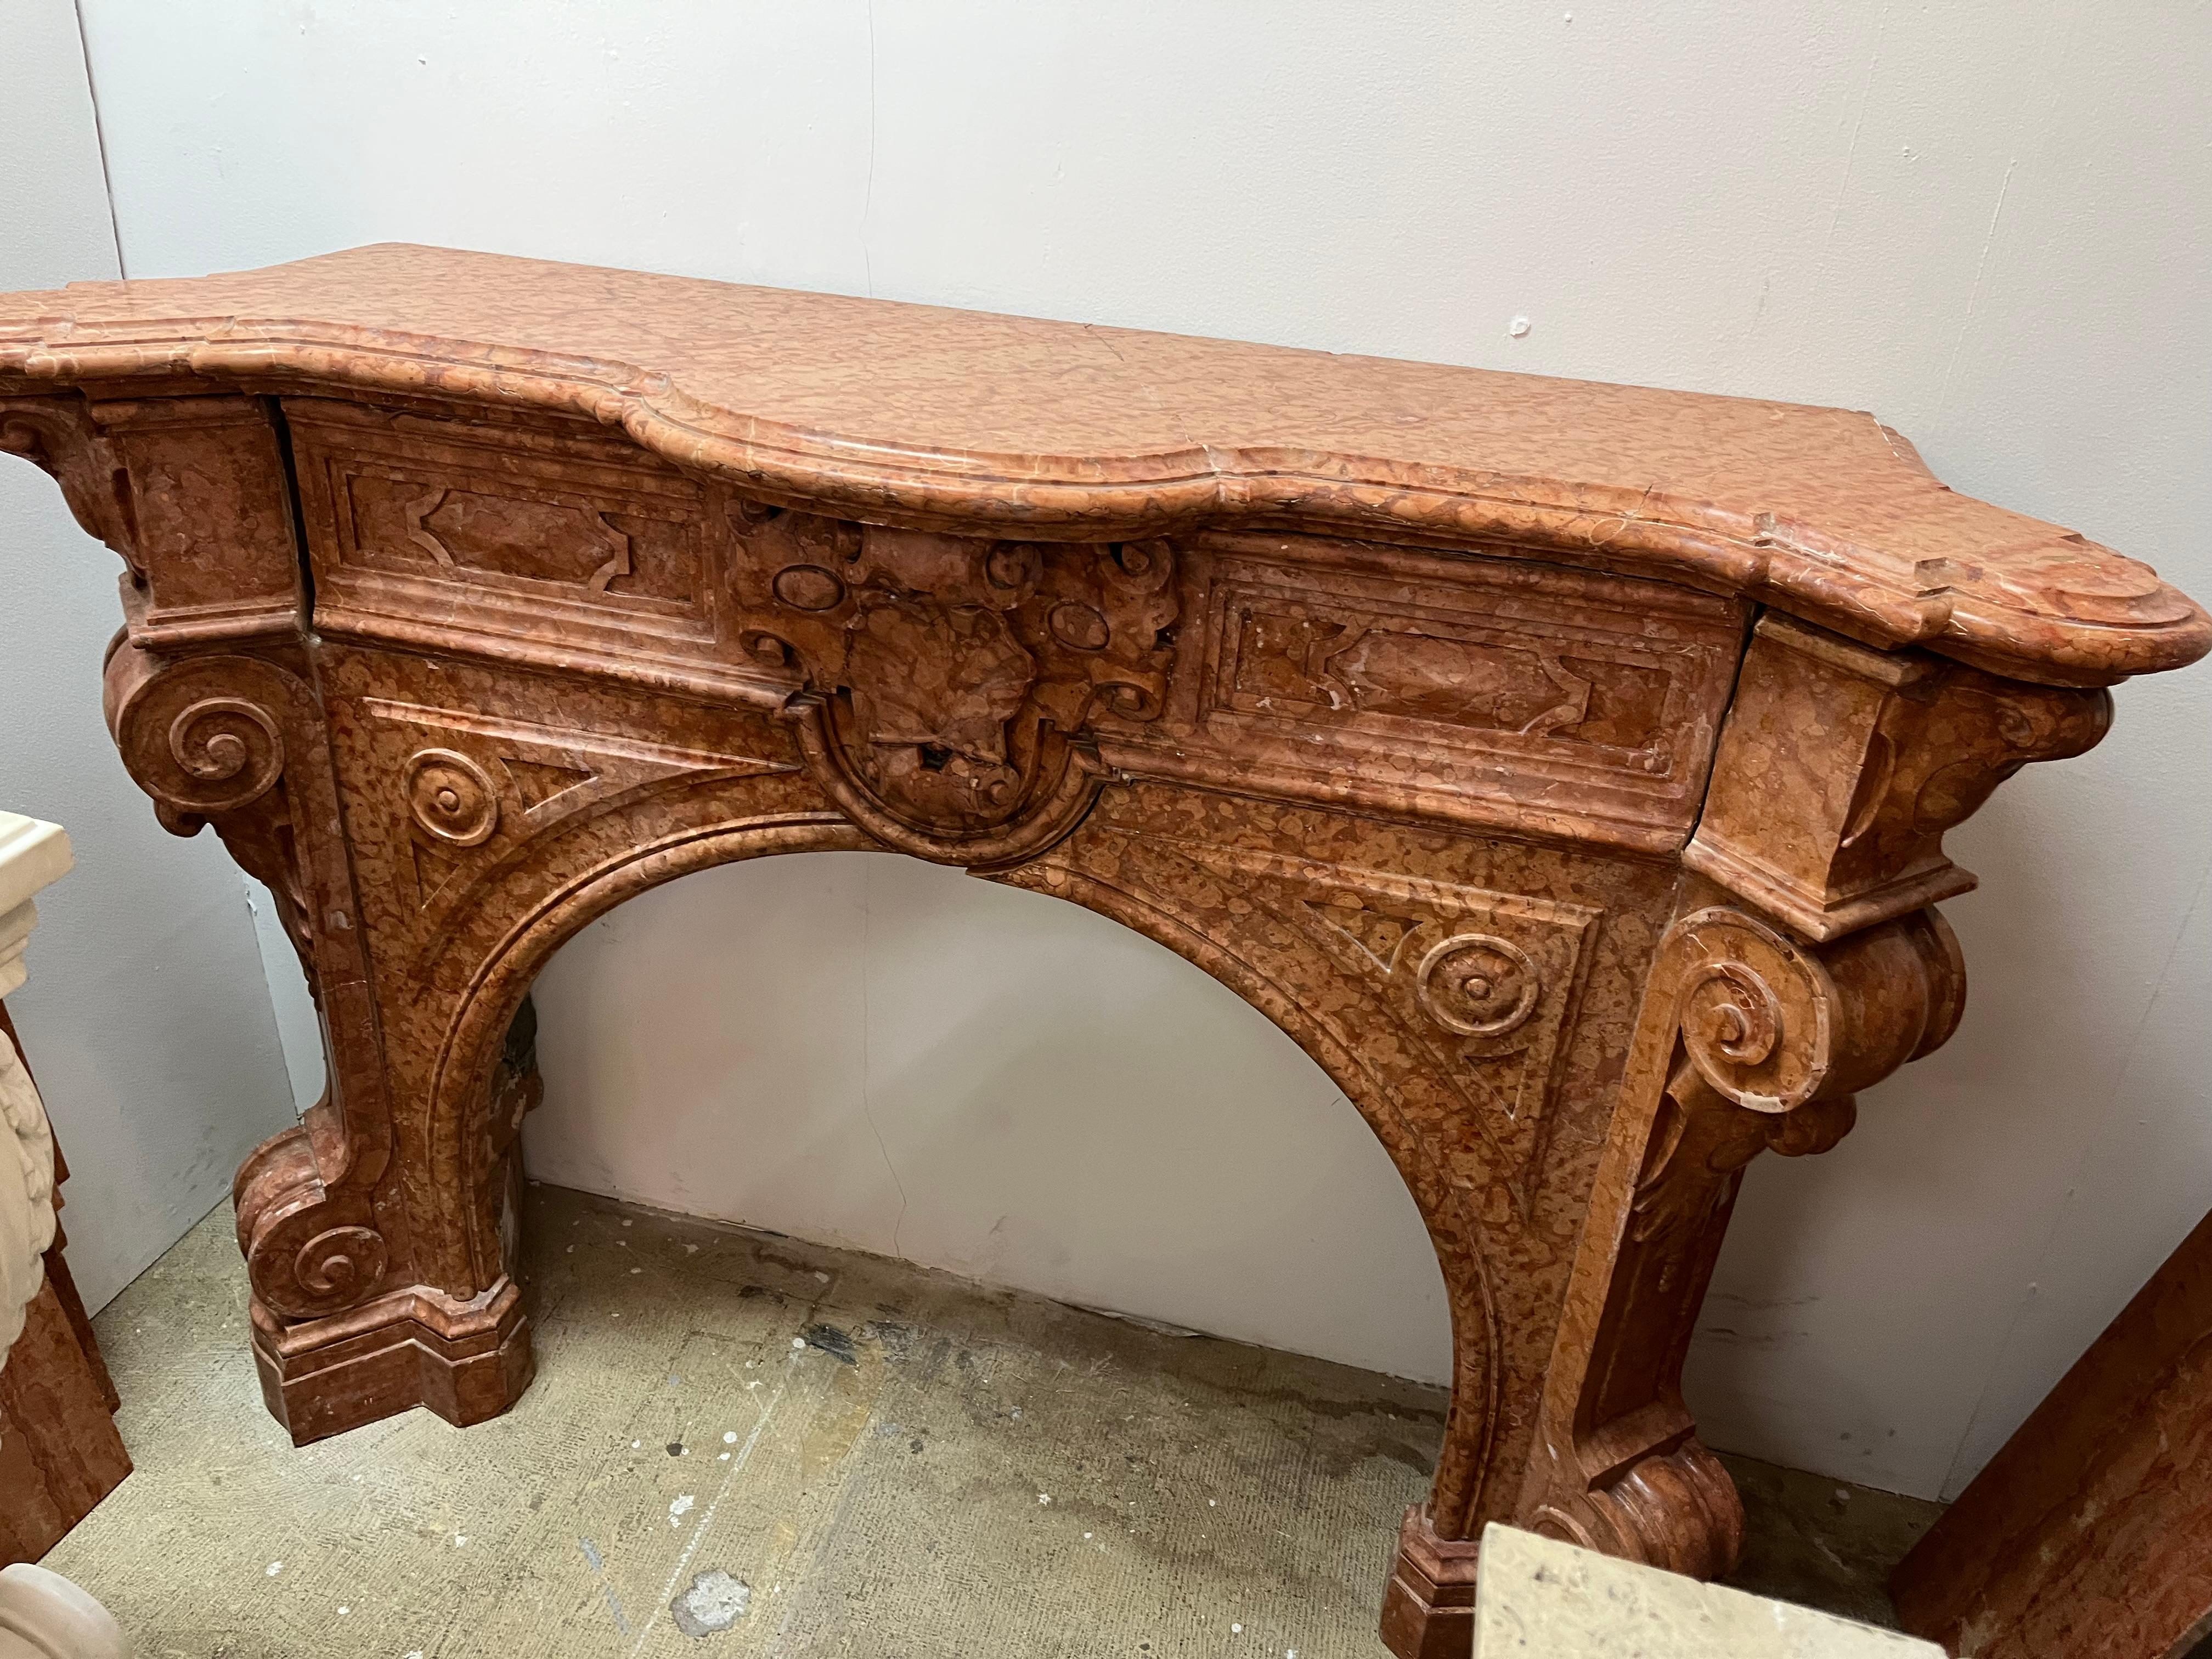 Victorian hand carved mantle in Sienna marble color with arched firebox.